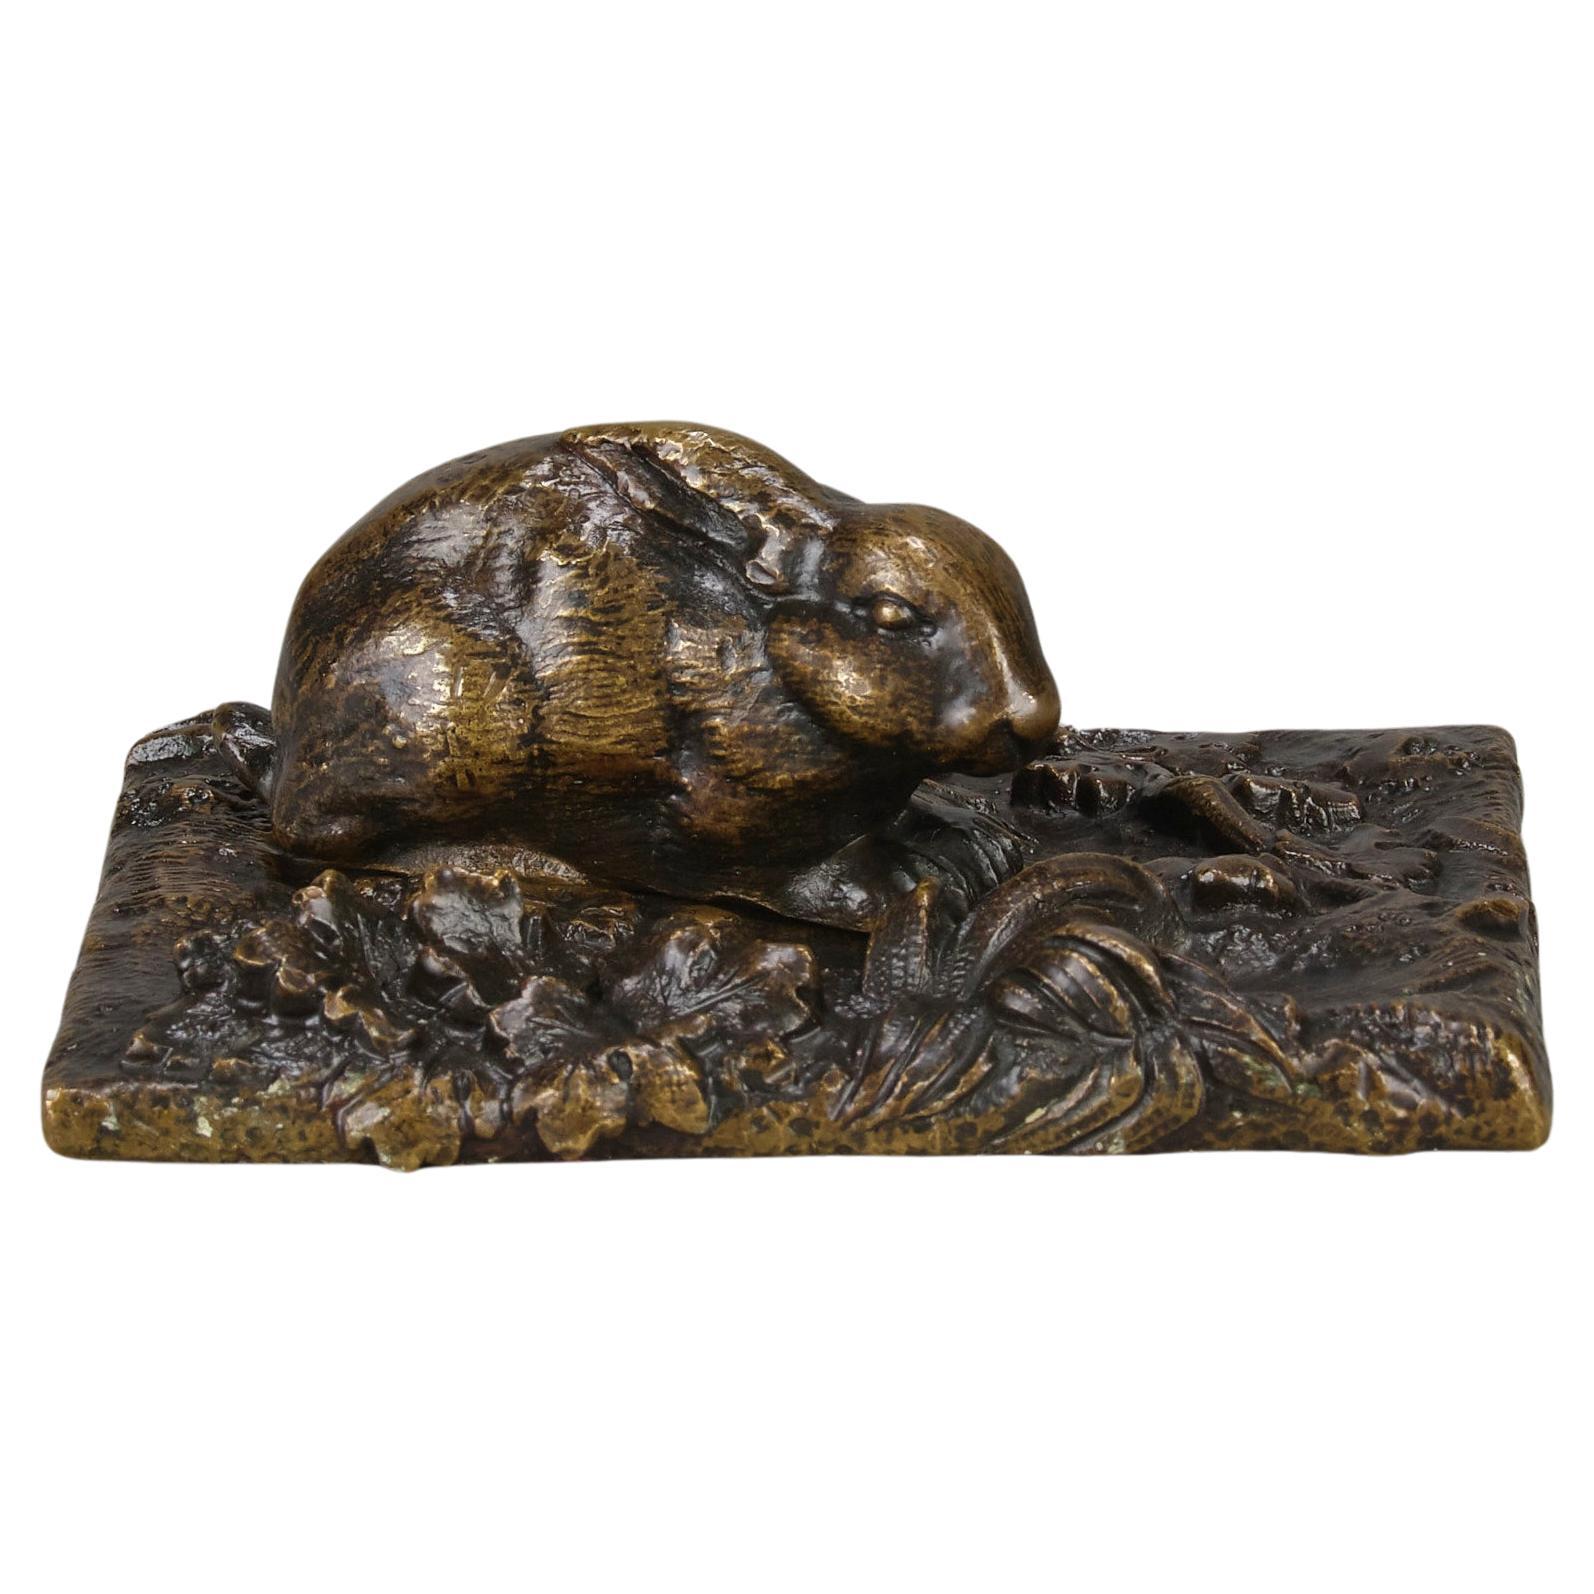 Early 20th Century Animalier French Bronze Sculpture entitled "Seated Rabbit" For Sale